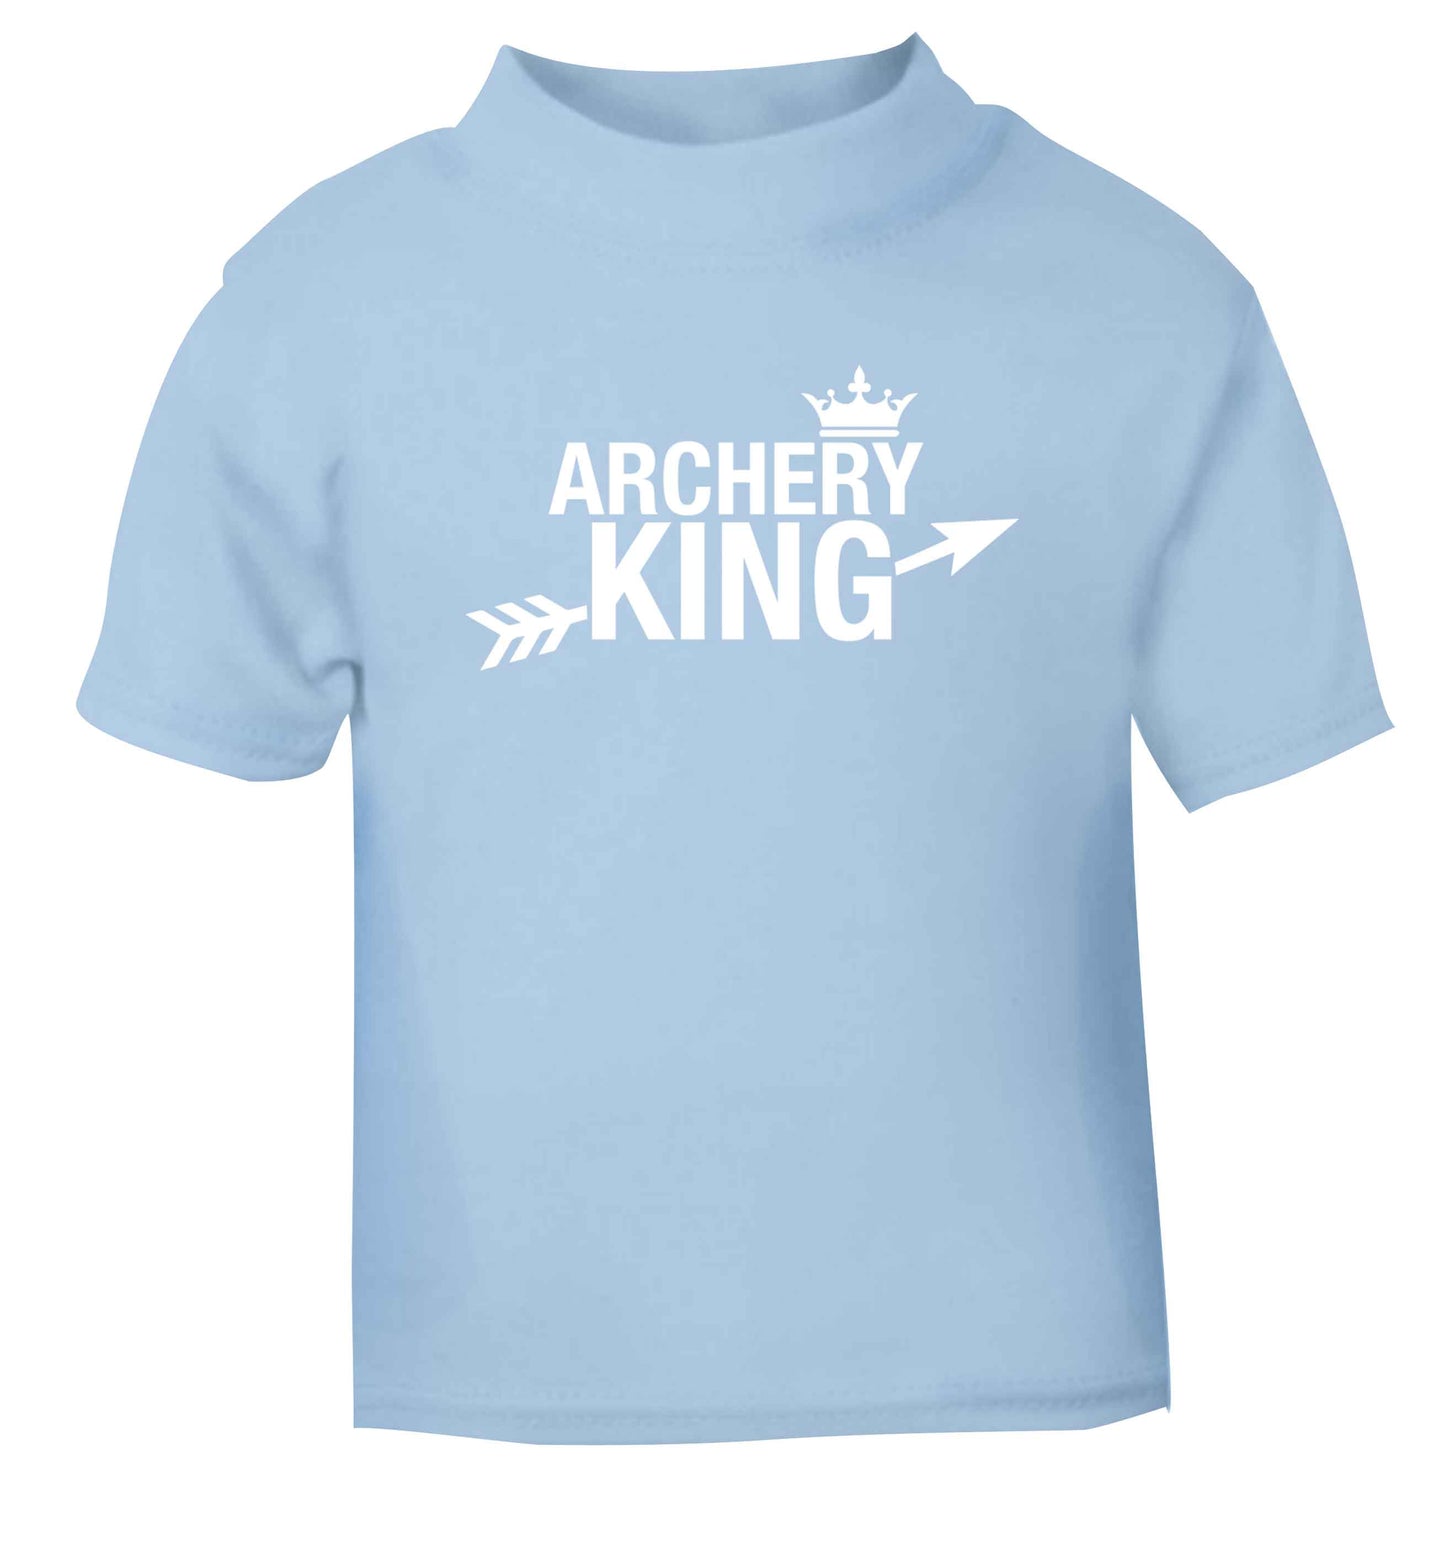 Archery king light blue Baby Toddler Tshirt 2 Years